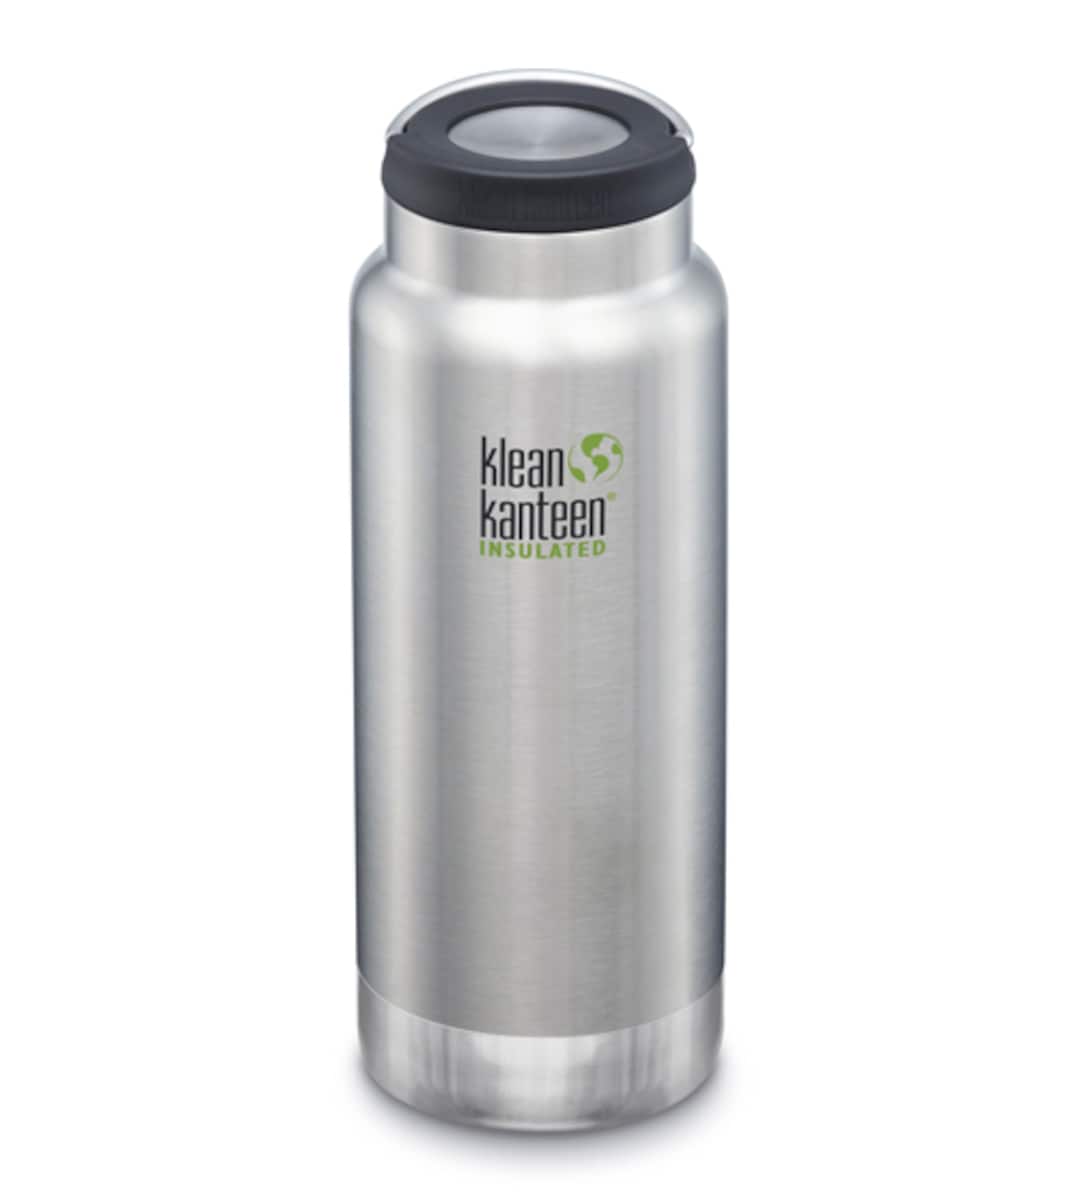 Klean Kanteen TKWide Insulated 946ml Wide Loop Cap Bottle Brushed Stainless